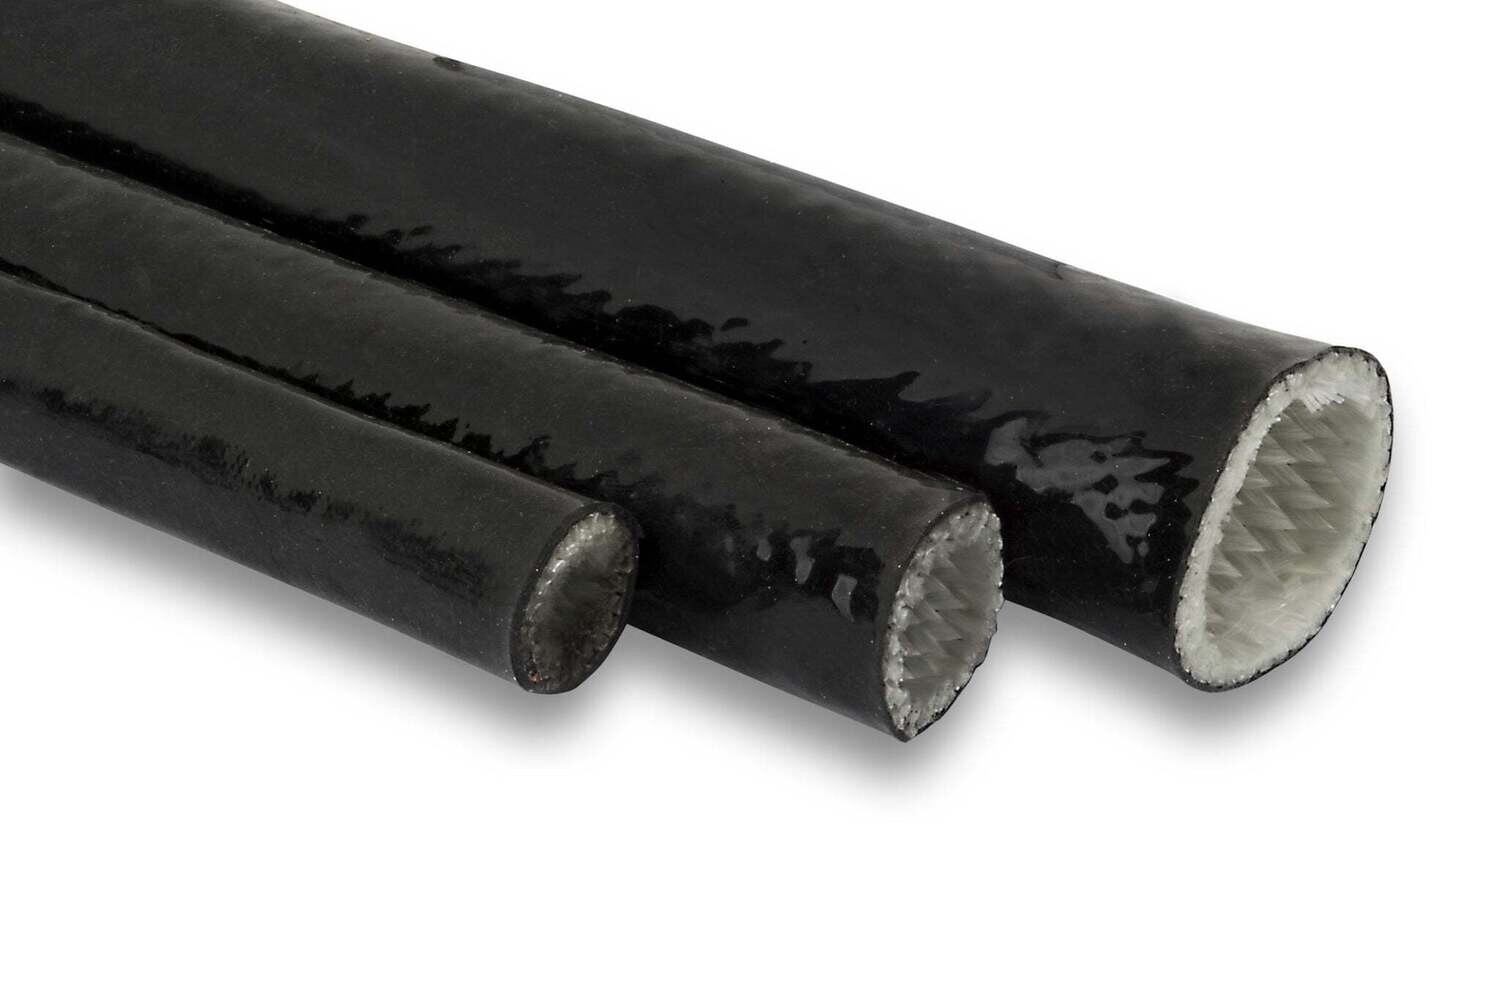 Black Silicon High Heat Sleeve - 20mm, 5.0m Multiple Qty will come on a continuous Roll